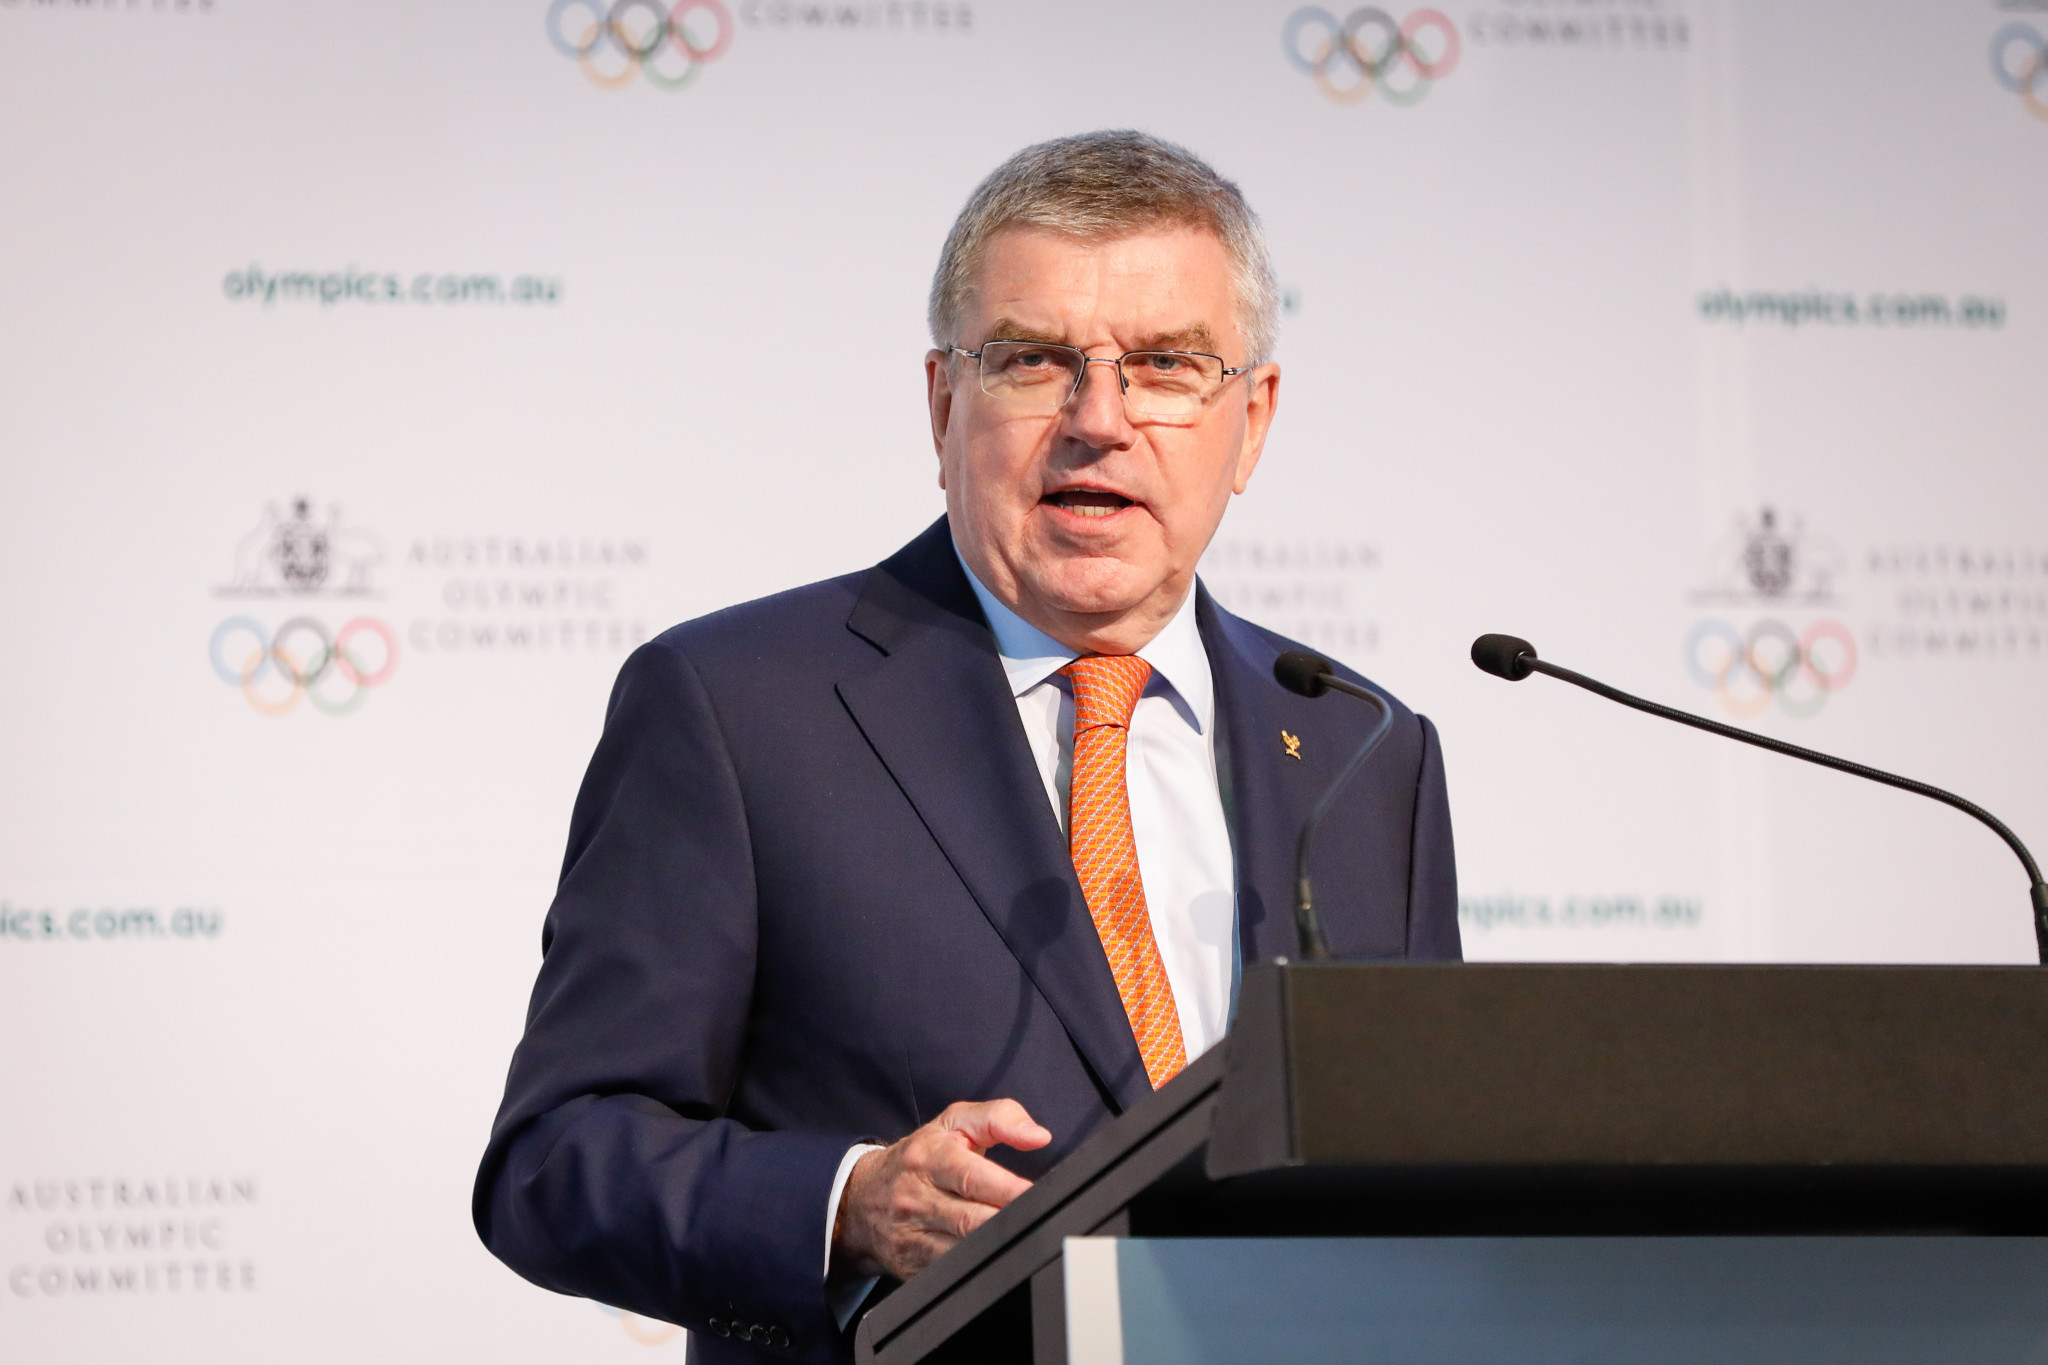 Bach tells AOC he does not want "too many losers" as they prepare Brisbane bid for 2032 Olympics